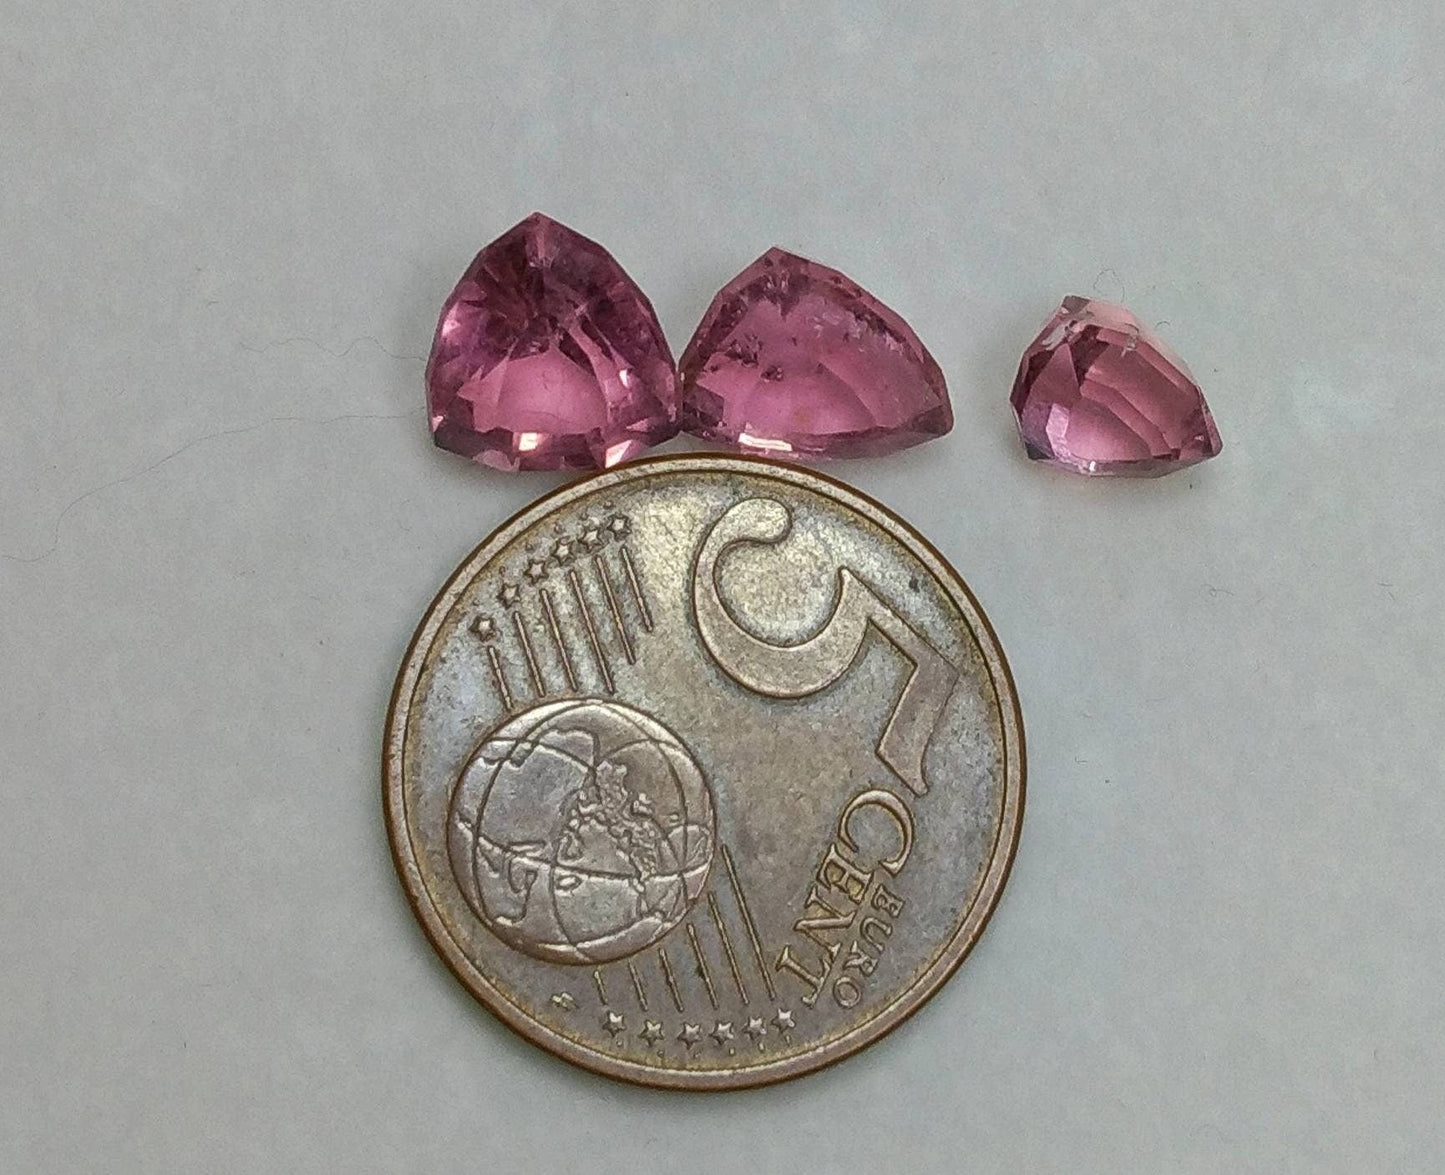 ARSAA GEMS AND MINERALSNatural top quality beautiful 7.5 carats SI clarity faceted trillion shapes pink rubellite gems - Premium  from ARSAA GEMS AND MINERALS - Just $40.00! Shop now at ARSAA GEMS AND MINERALS